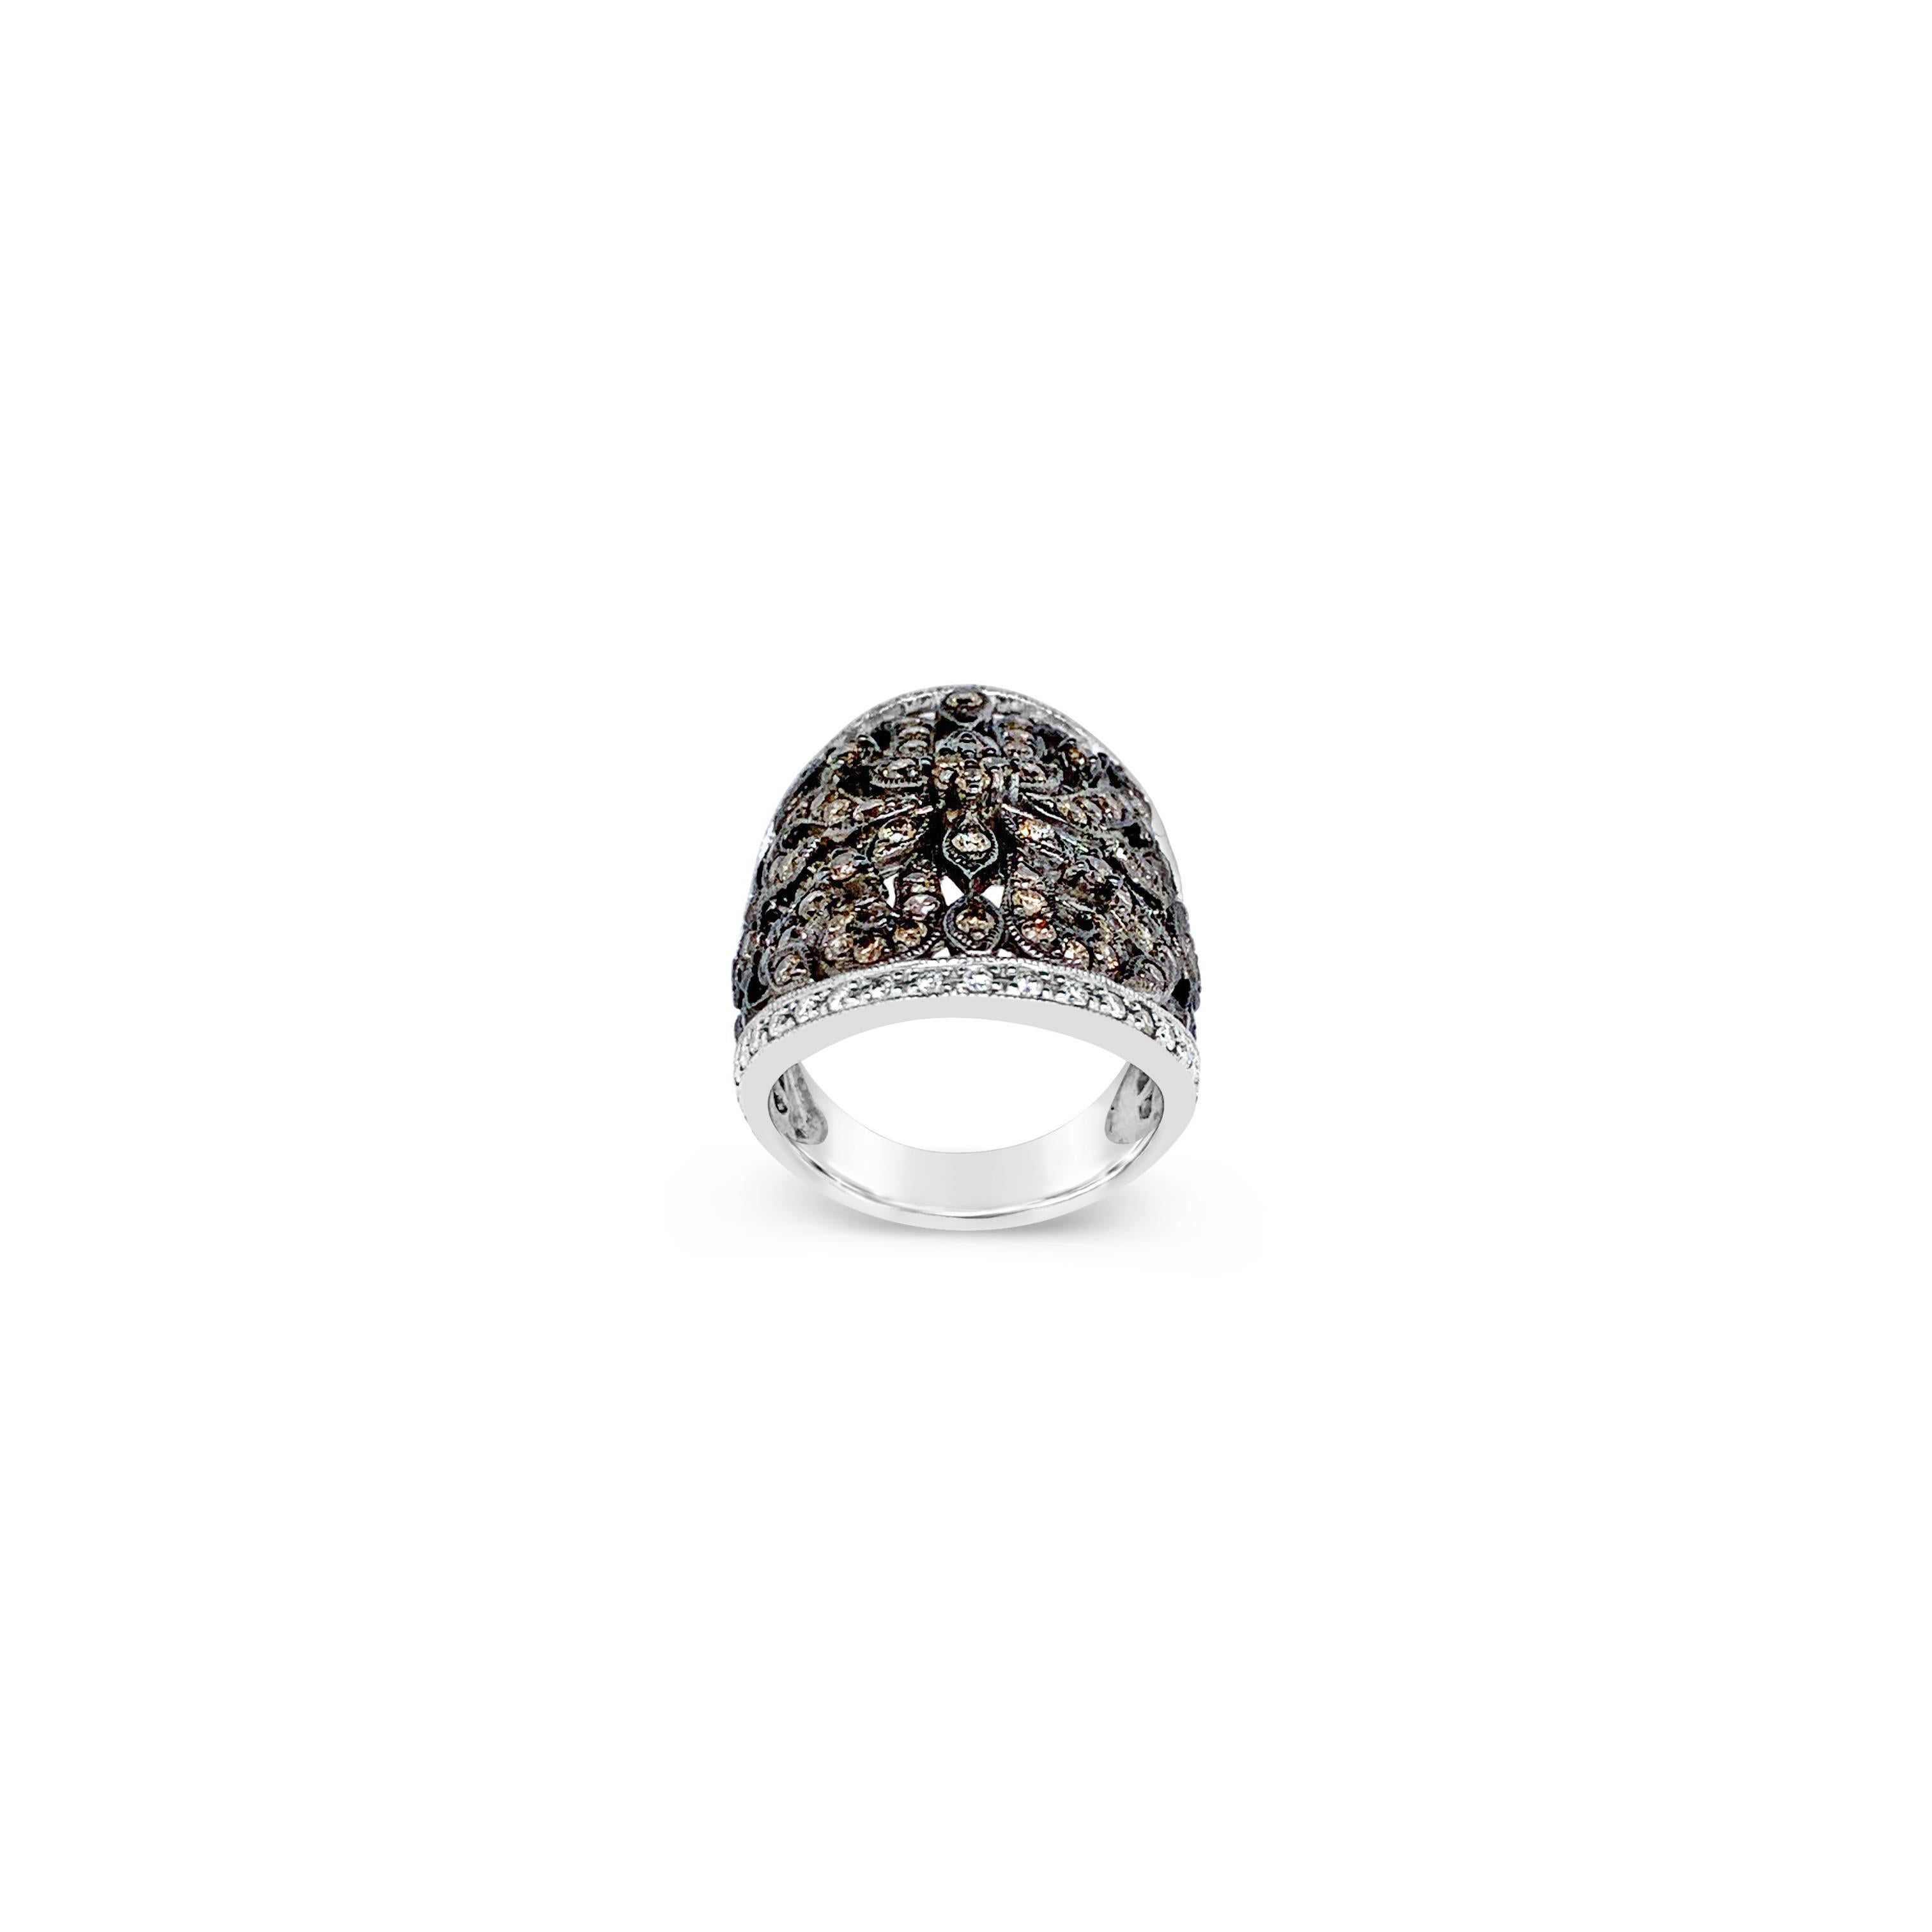 Le Vian Red Carpet® Ring featuring 1.56 cts. Chocolate Diamonds®, .40 cts. Vanilla Diamonds® set in 14K Vanilla Gold®

Diamonds Breakdown:
1.56 cts Brown Diamonds
.40 cts White Diamonds

Gems Breakdown:
None

Ring may or may not be sizable, please